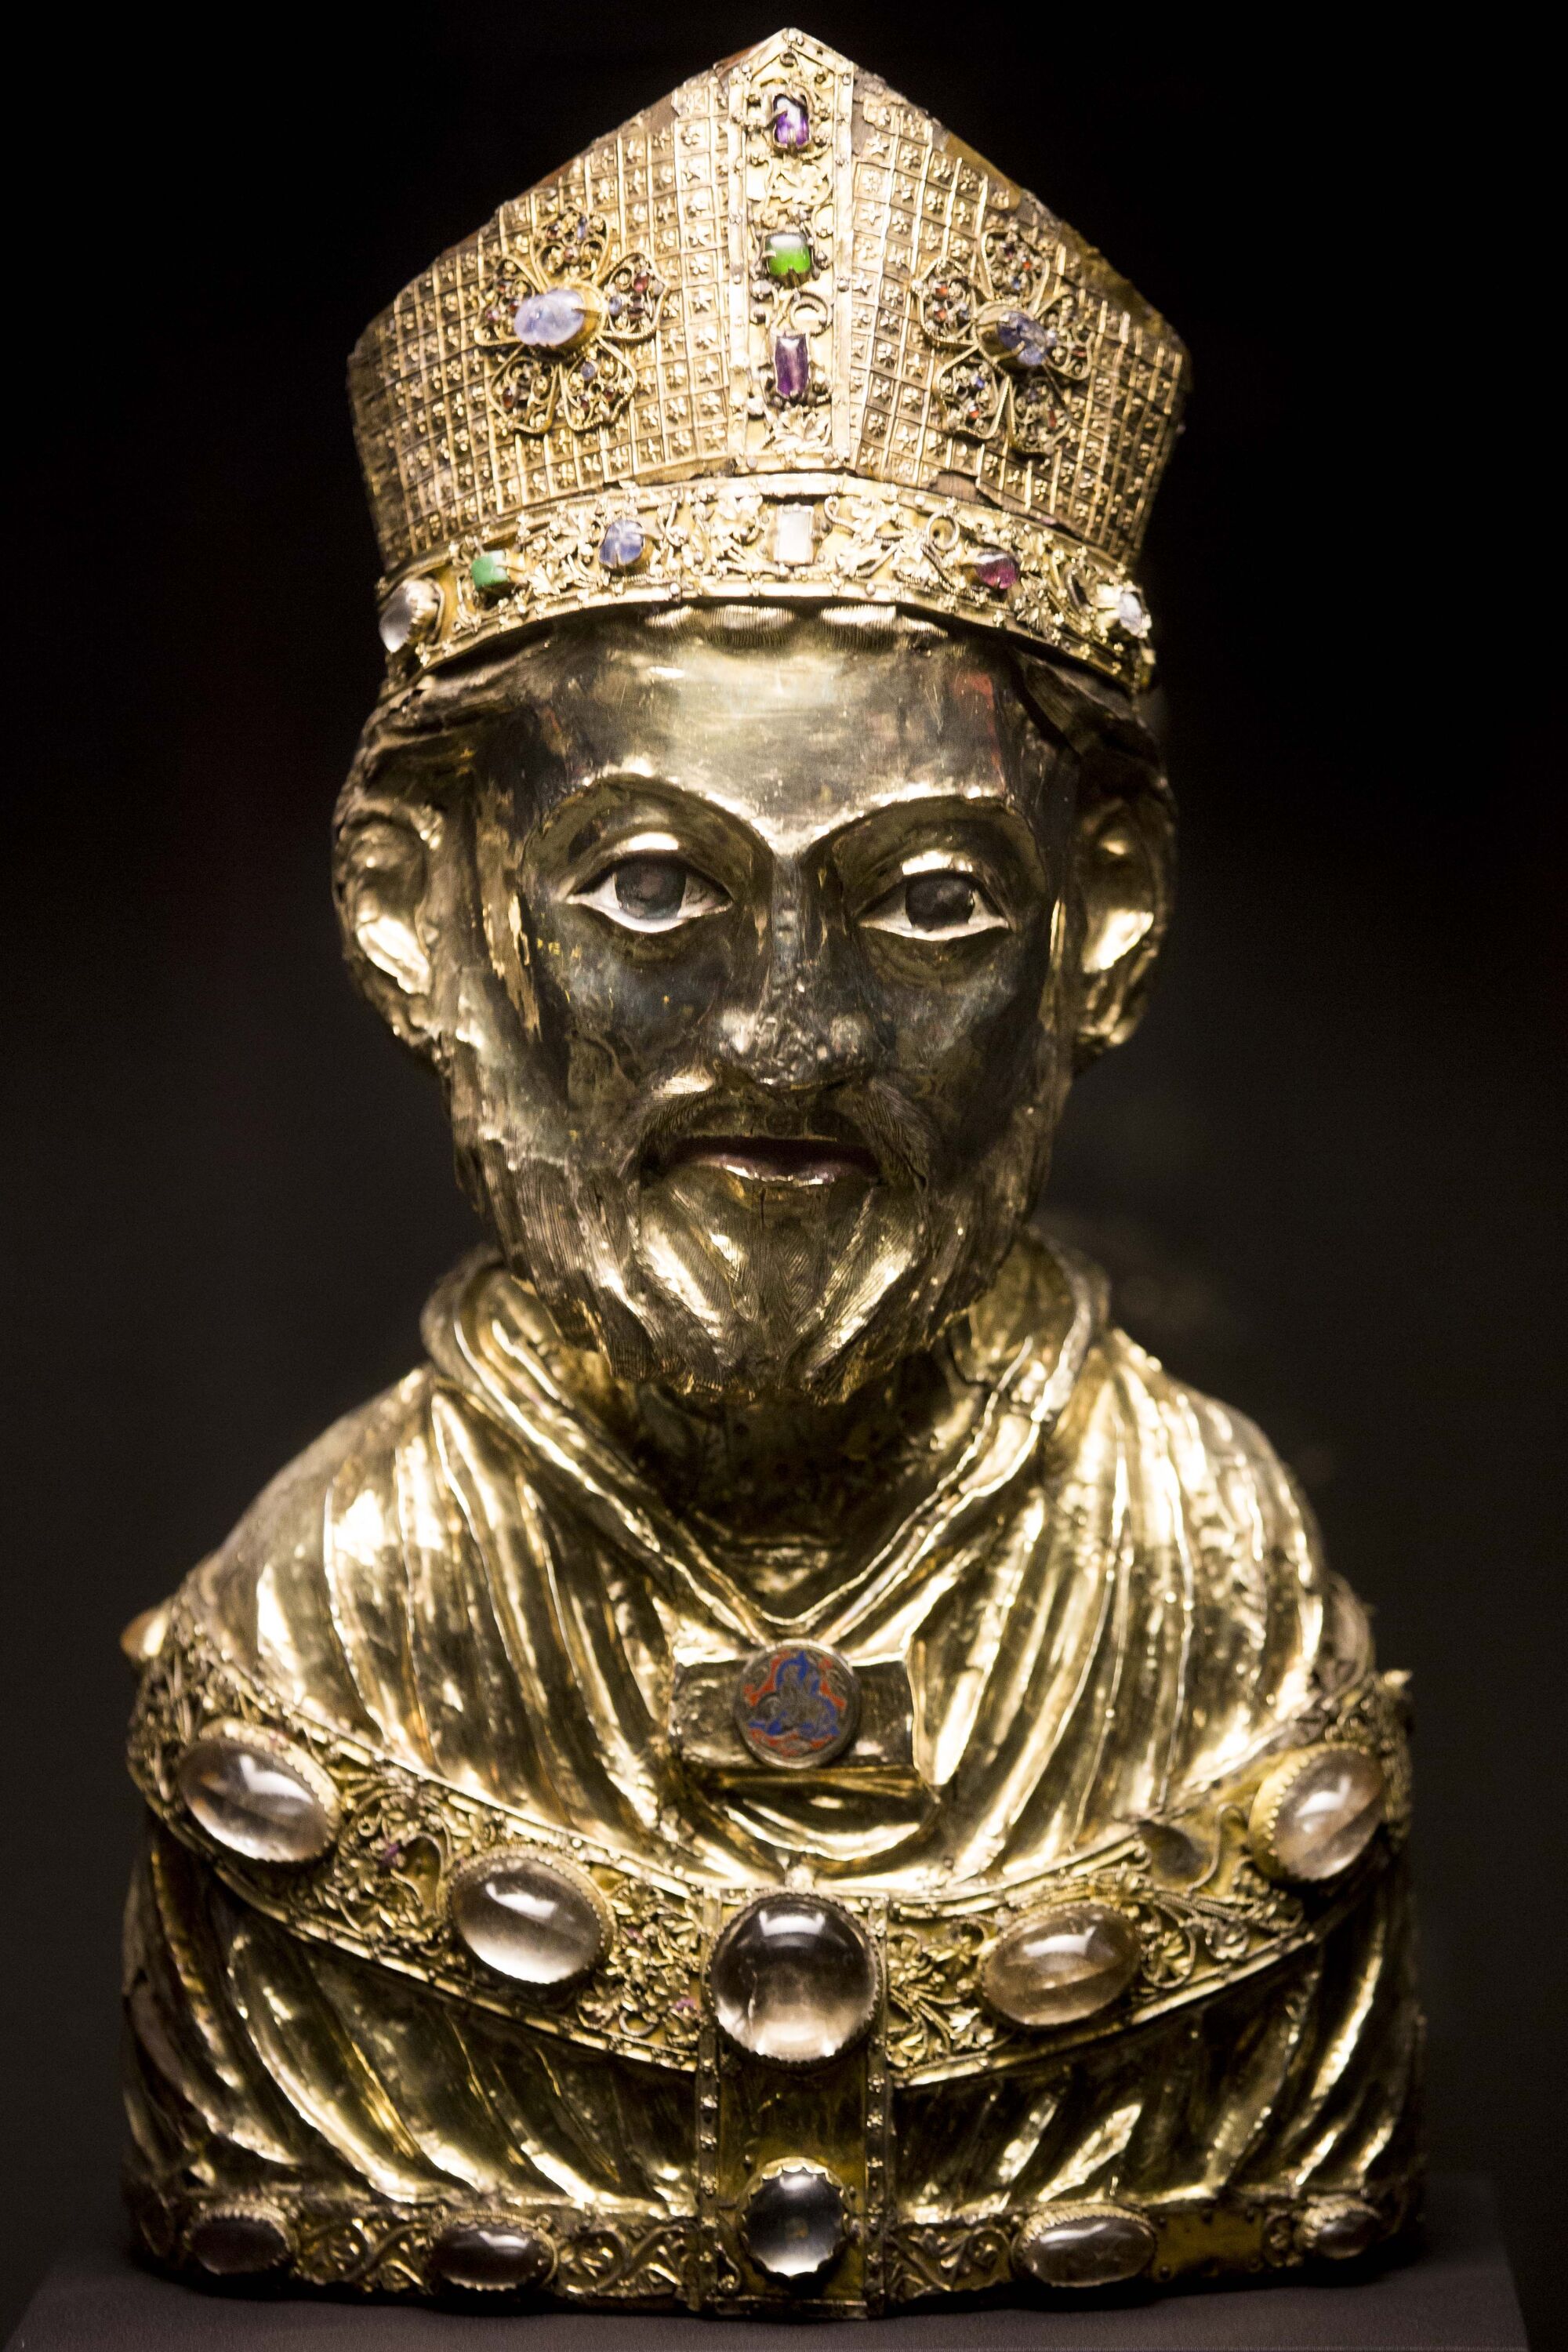 A medieval bust of St. Blaise, part of the Guelph Treasure, is displayed at the Bode Museum in Berlin.